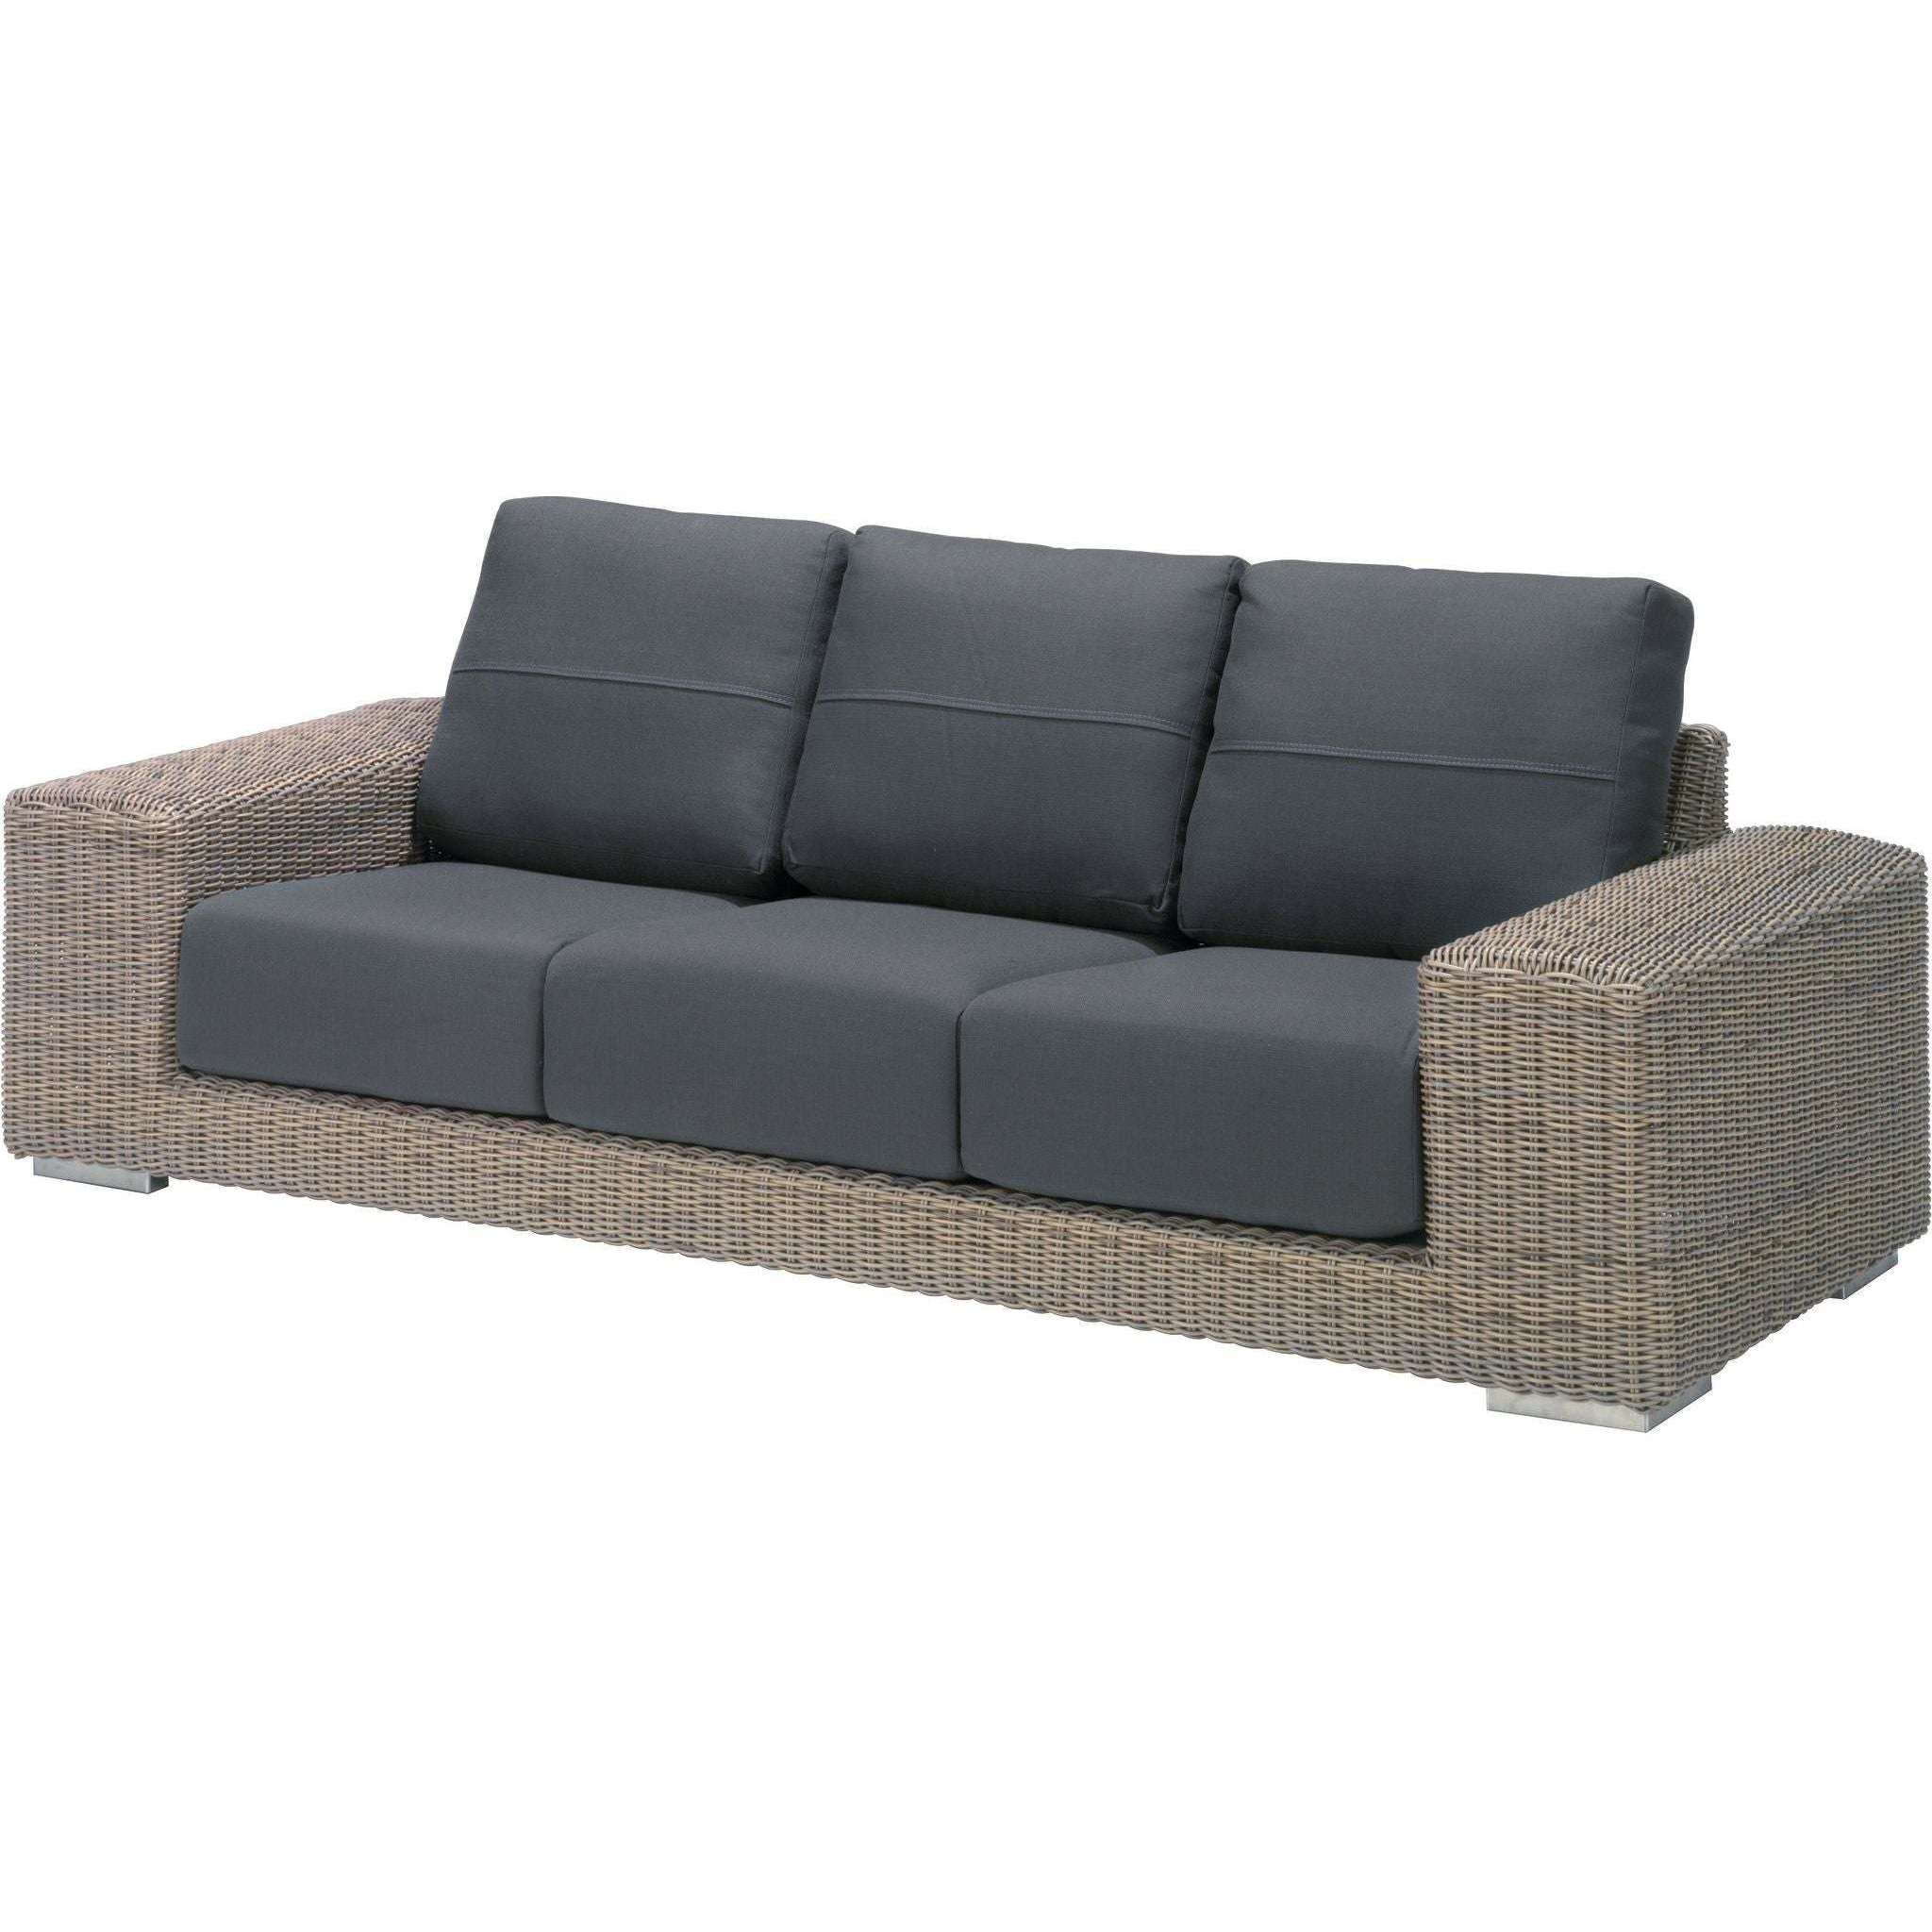 Exceptional Garden:4 Seasons Outdoor Kingston Lounge Set with Footstool and Kingston Coffee Table